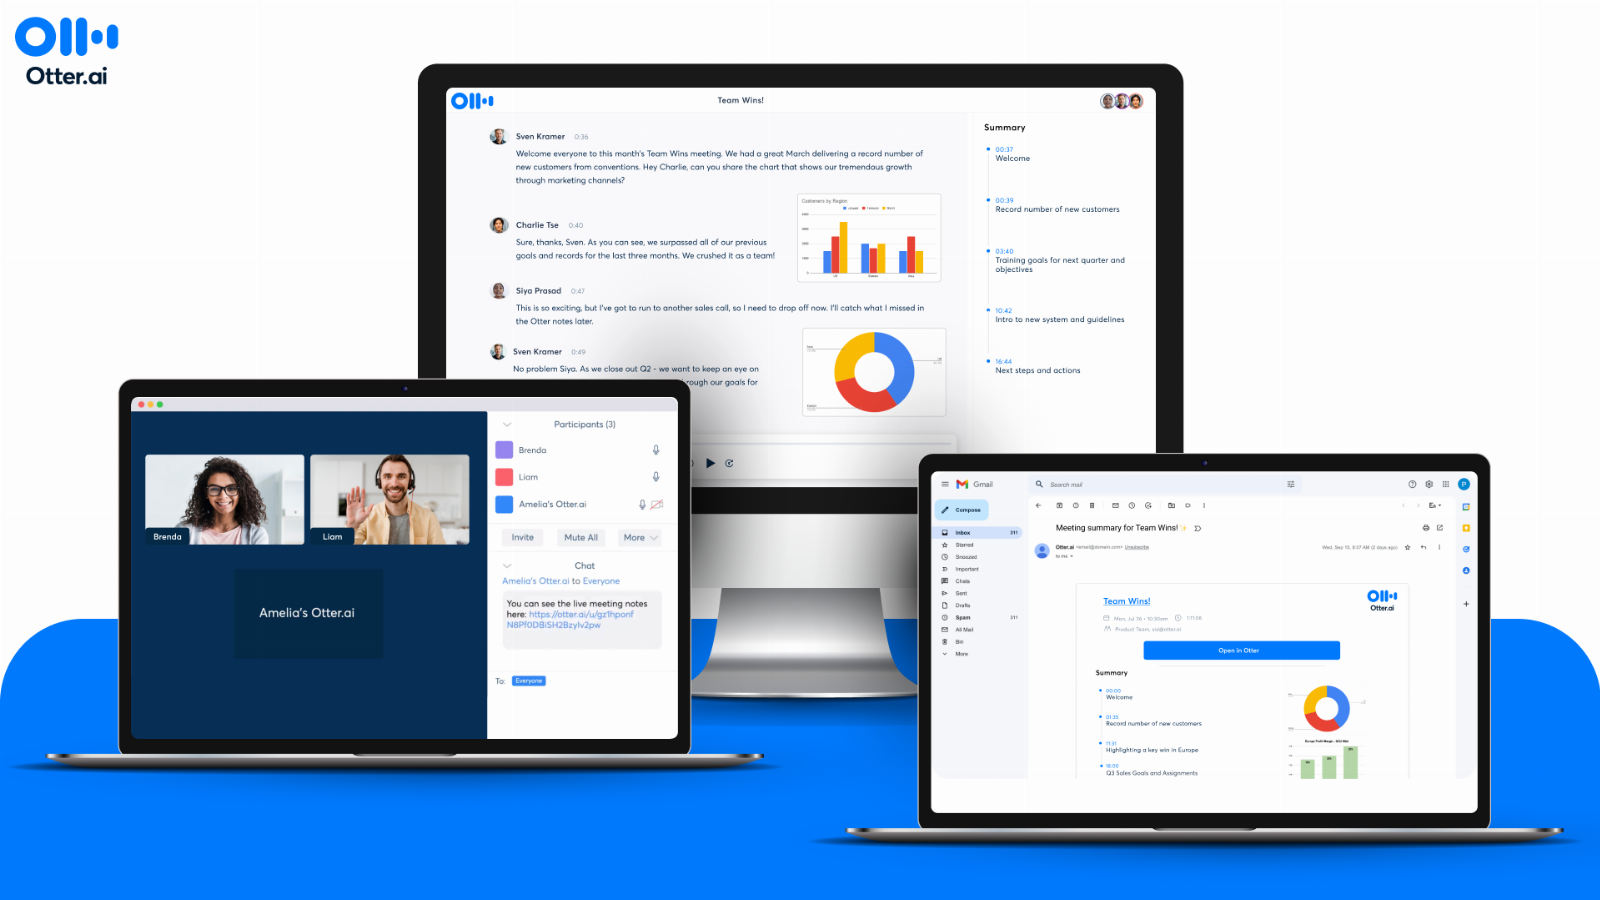 Otter.ai launches OtterPilot, its new AI meeting assistant